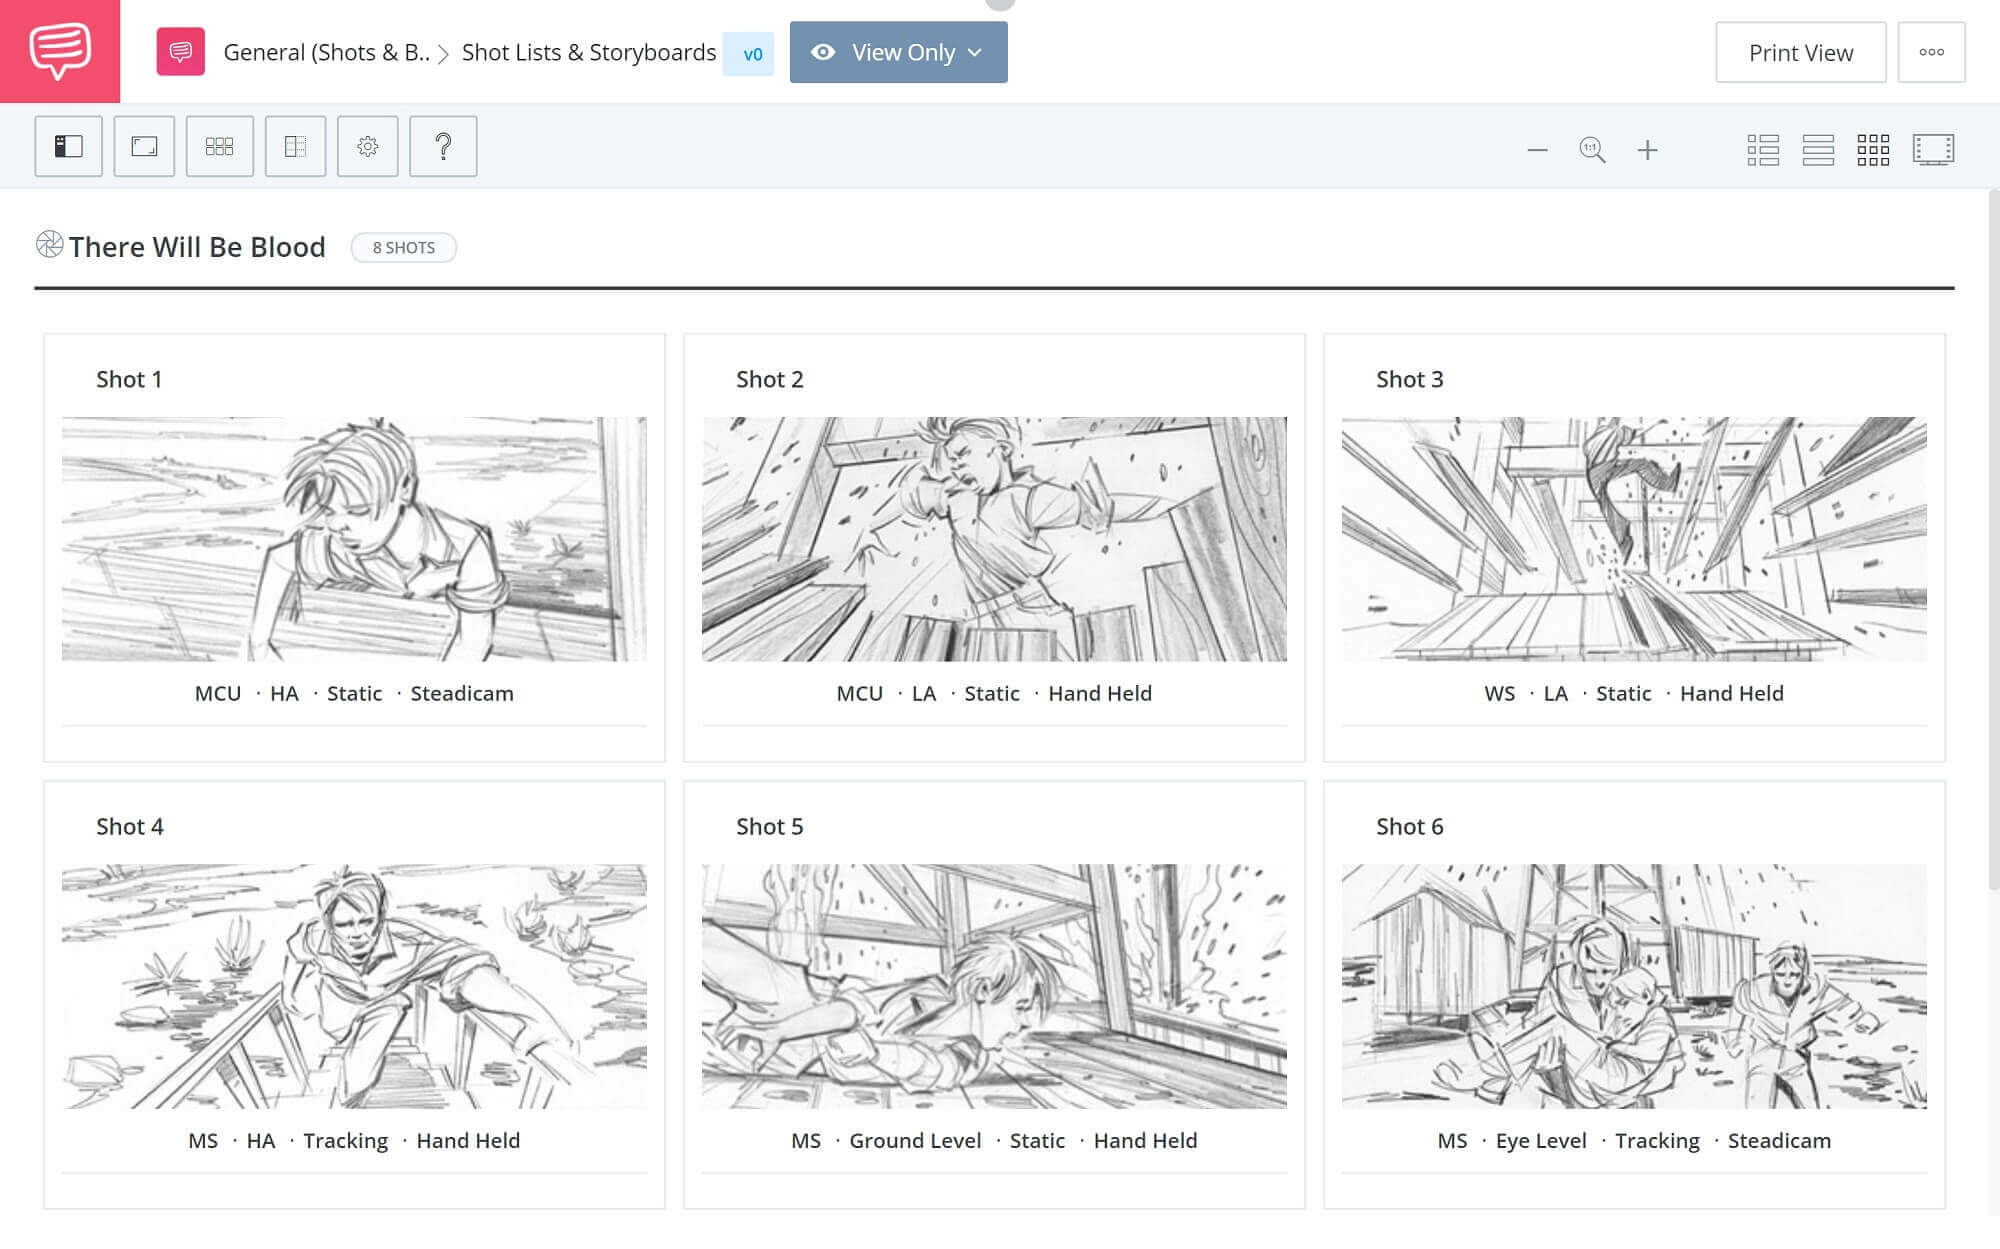 Film Storyboard Example -There Will Be Blood Storyboard - StudioBinder Storyboarding Software